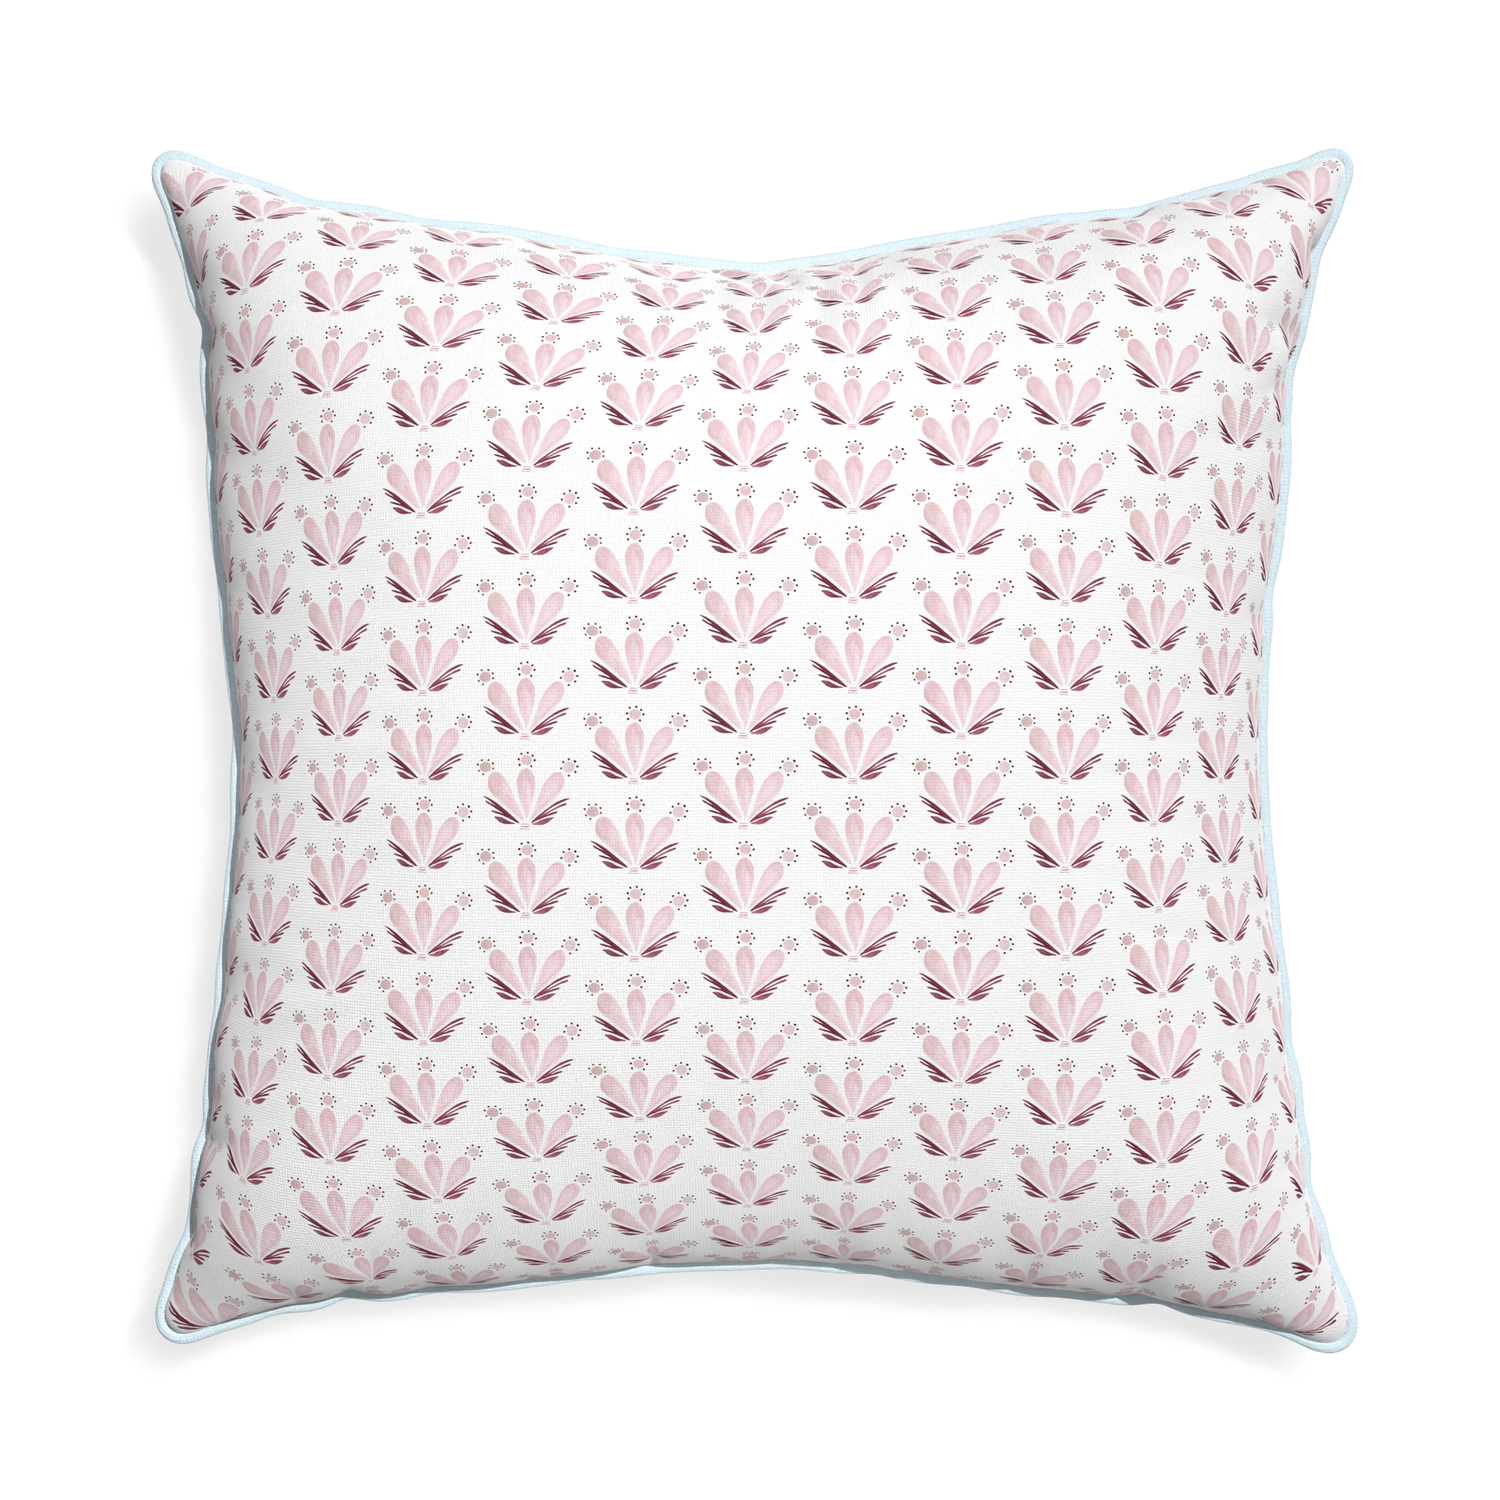 Euro-sham serena pink custom pink & burgundy drop repeat floralpillow with powder piping on white background